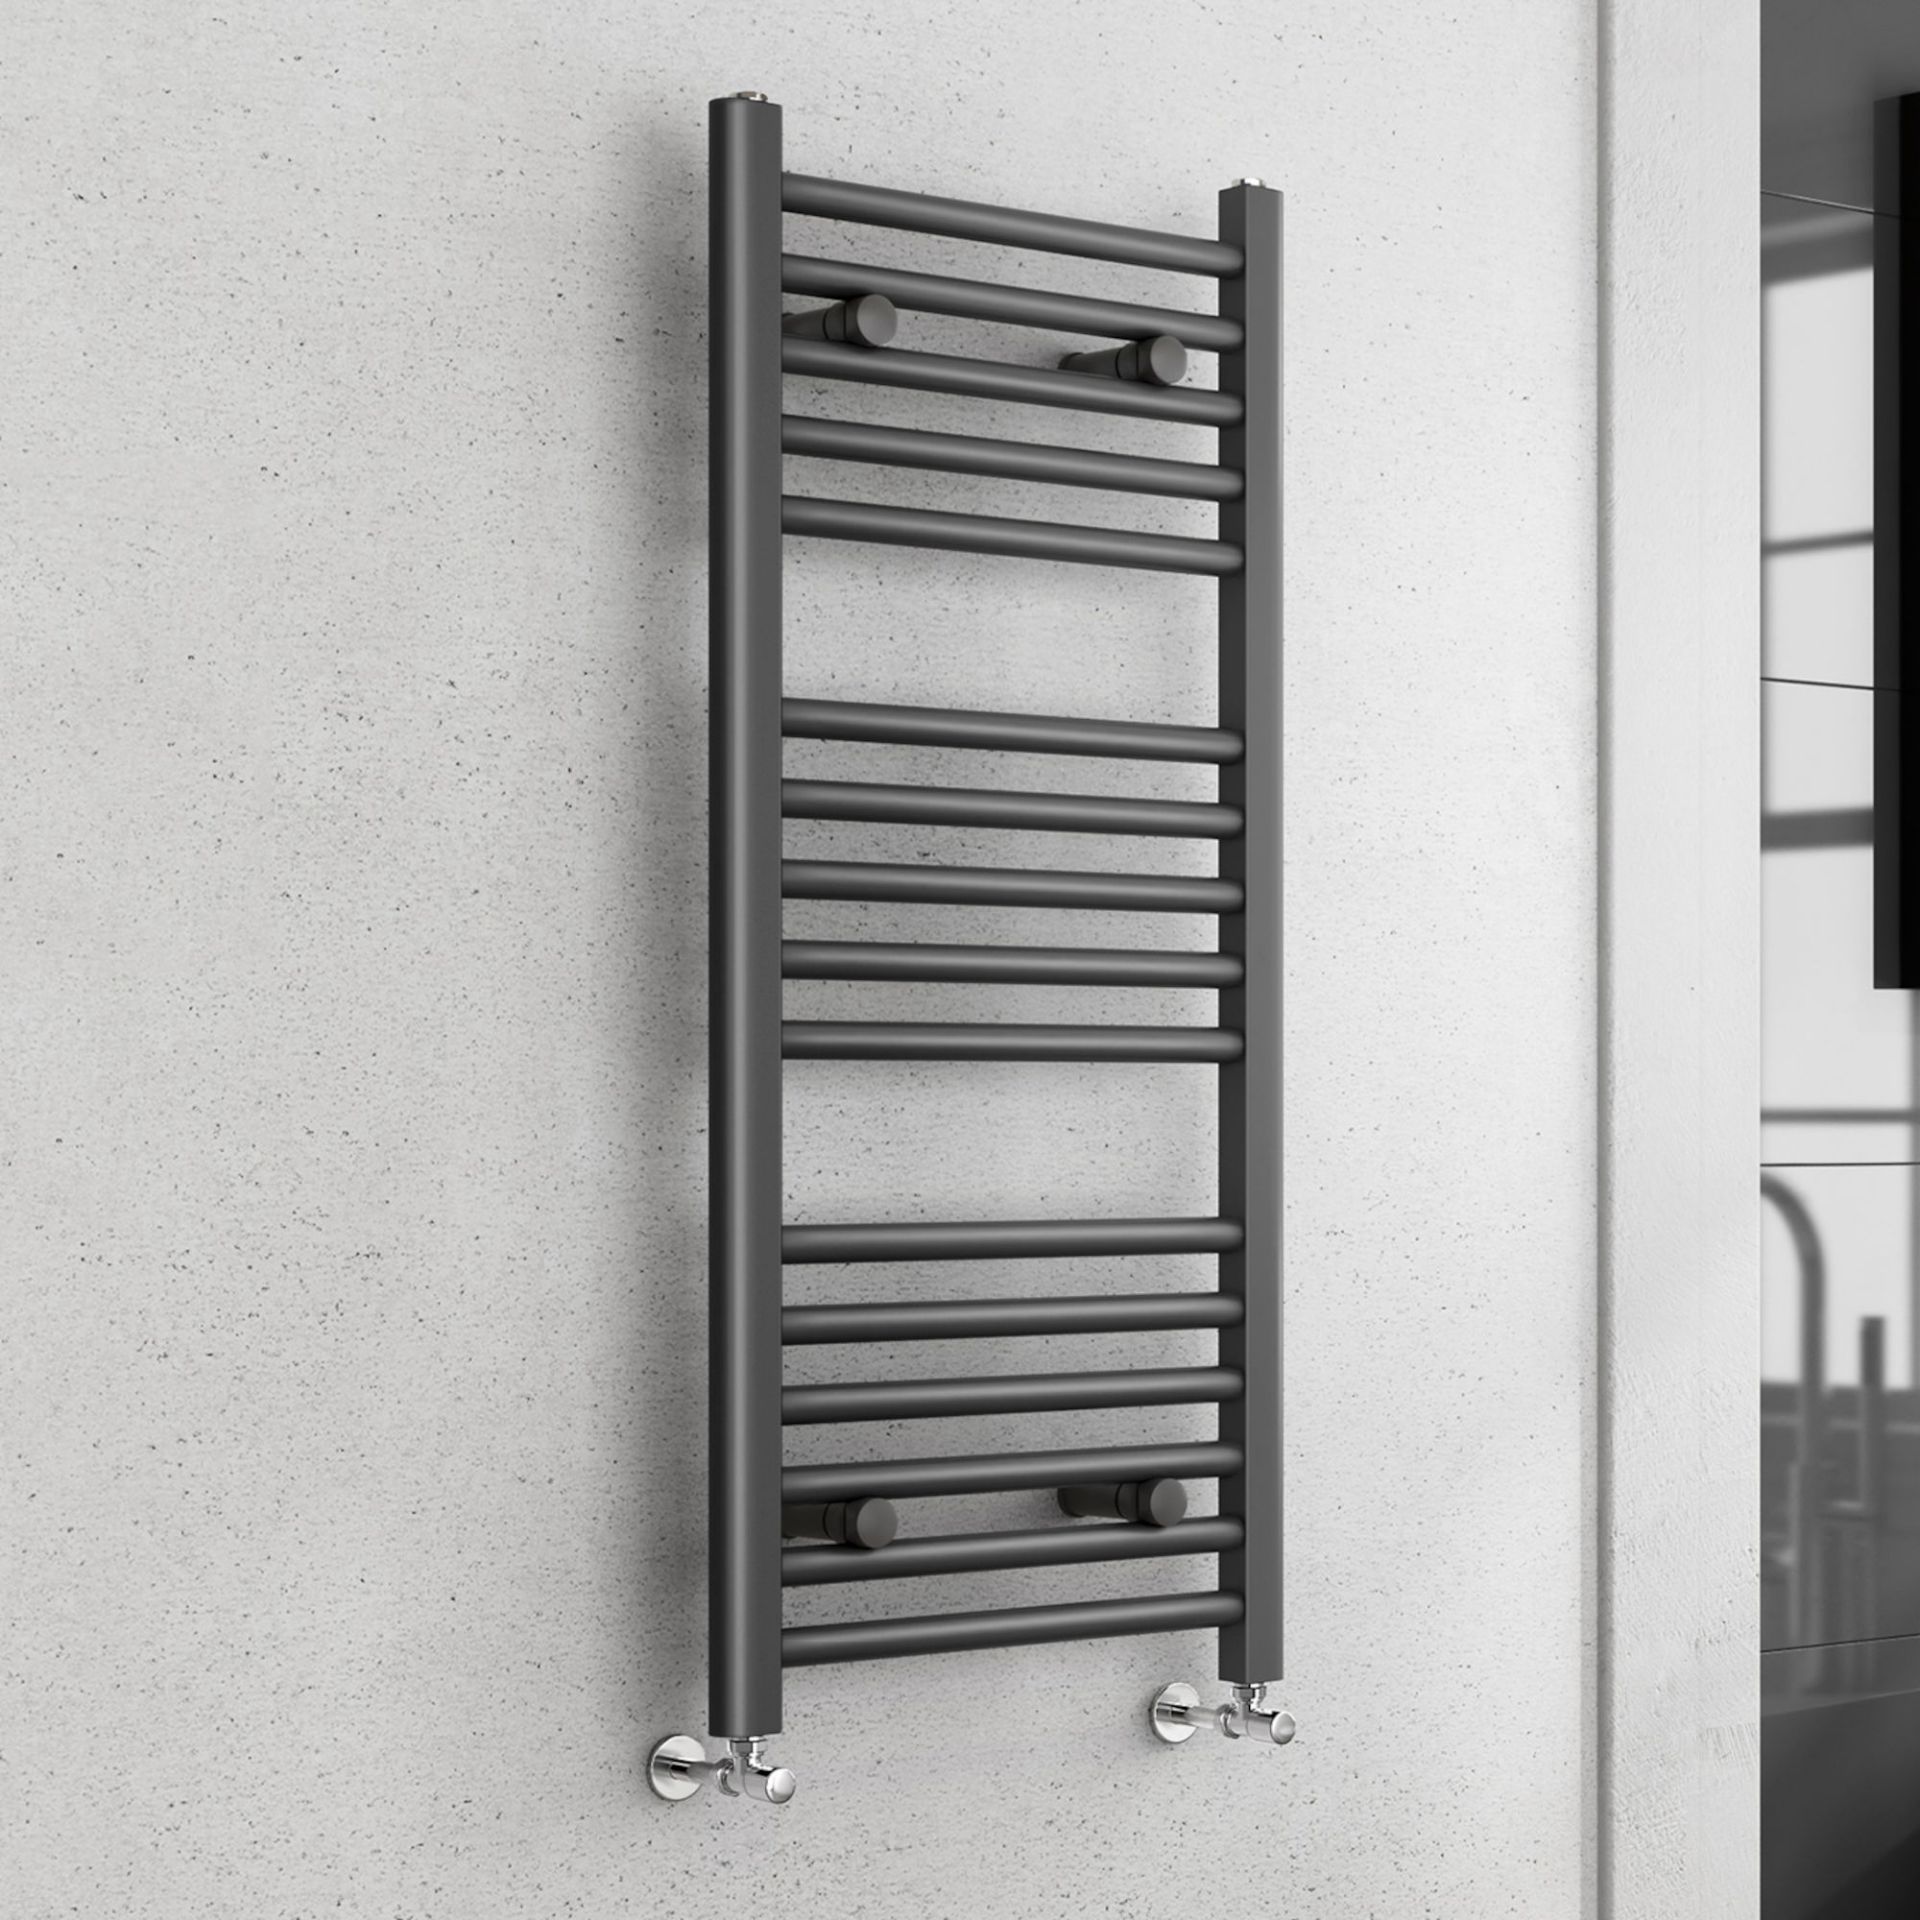 (NY169) 1000x450mm - 25mm Tubes - Anthracite Heated Straight Rail Ladder Towel Radiator. This